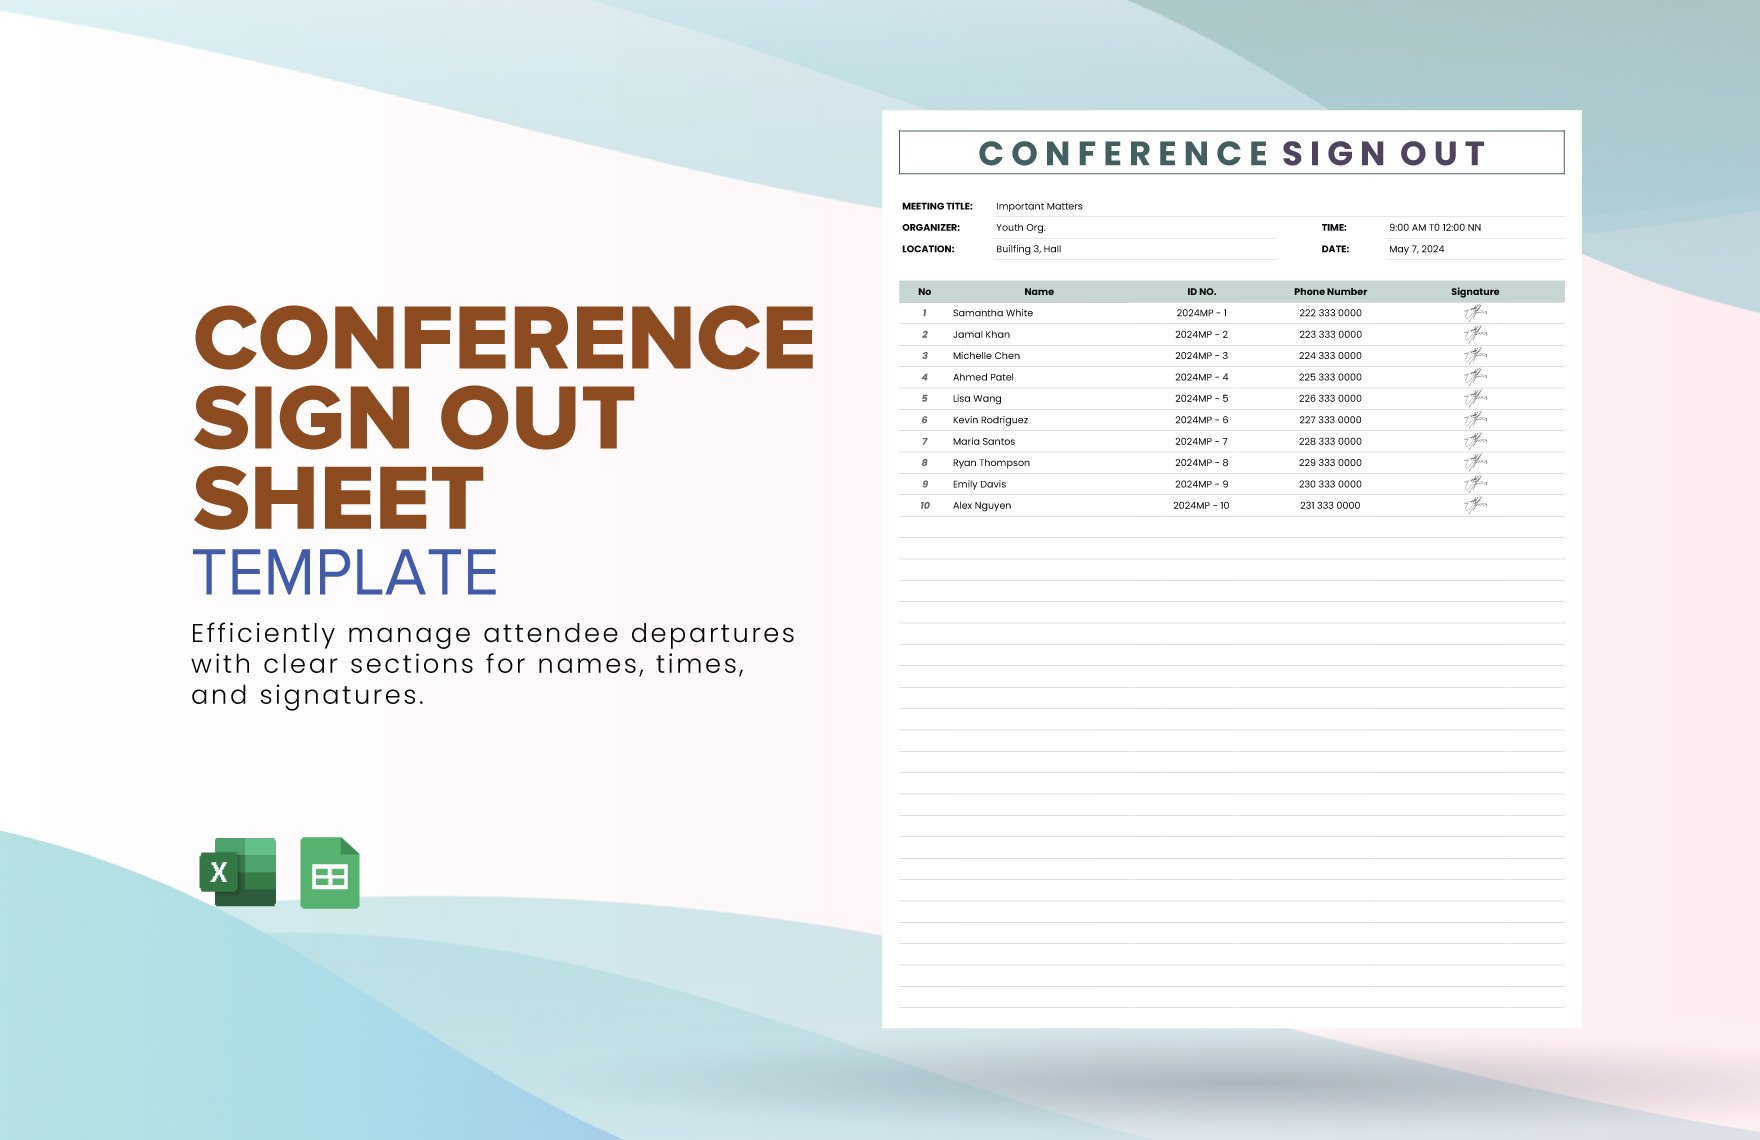 Conference Sign Out Sheet Template in Excel, Google Sheets